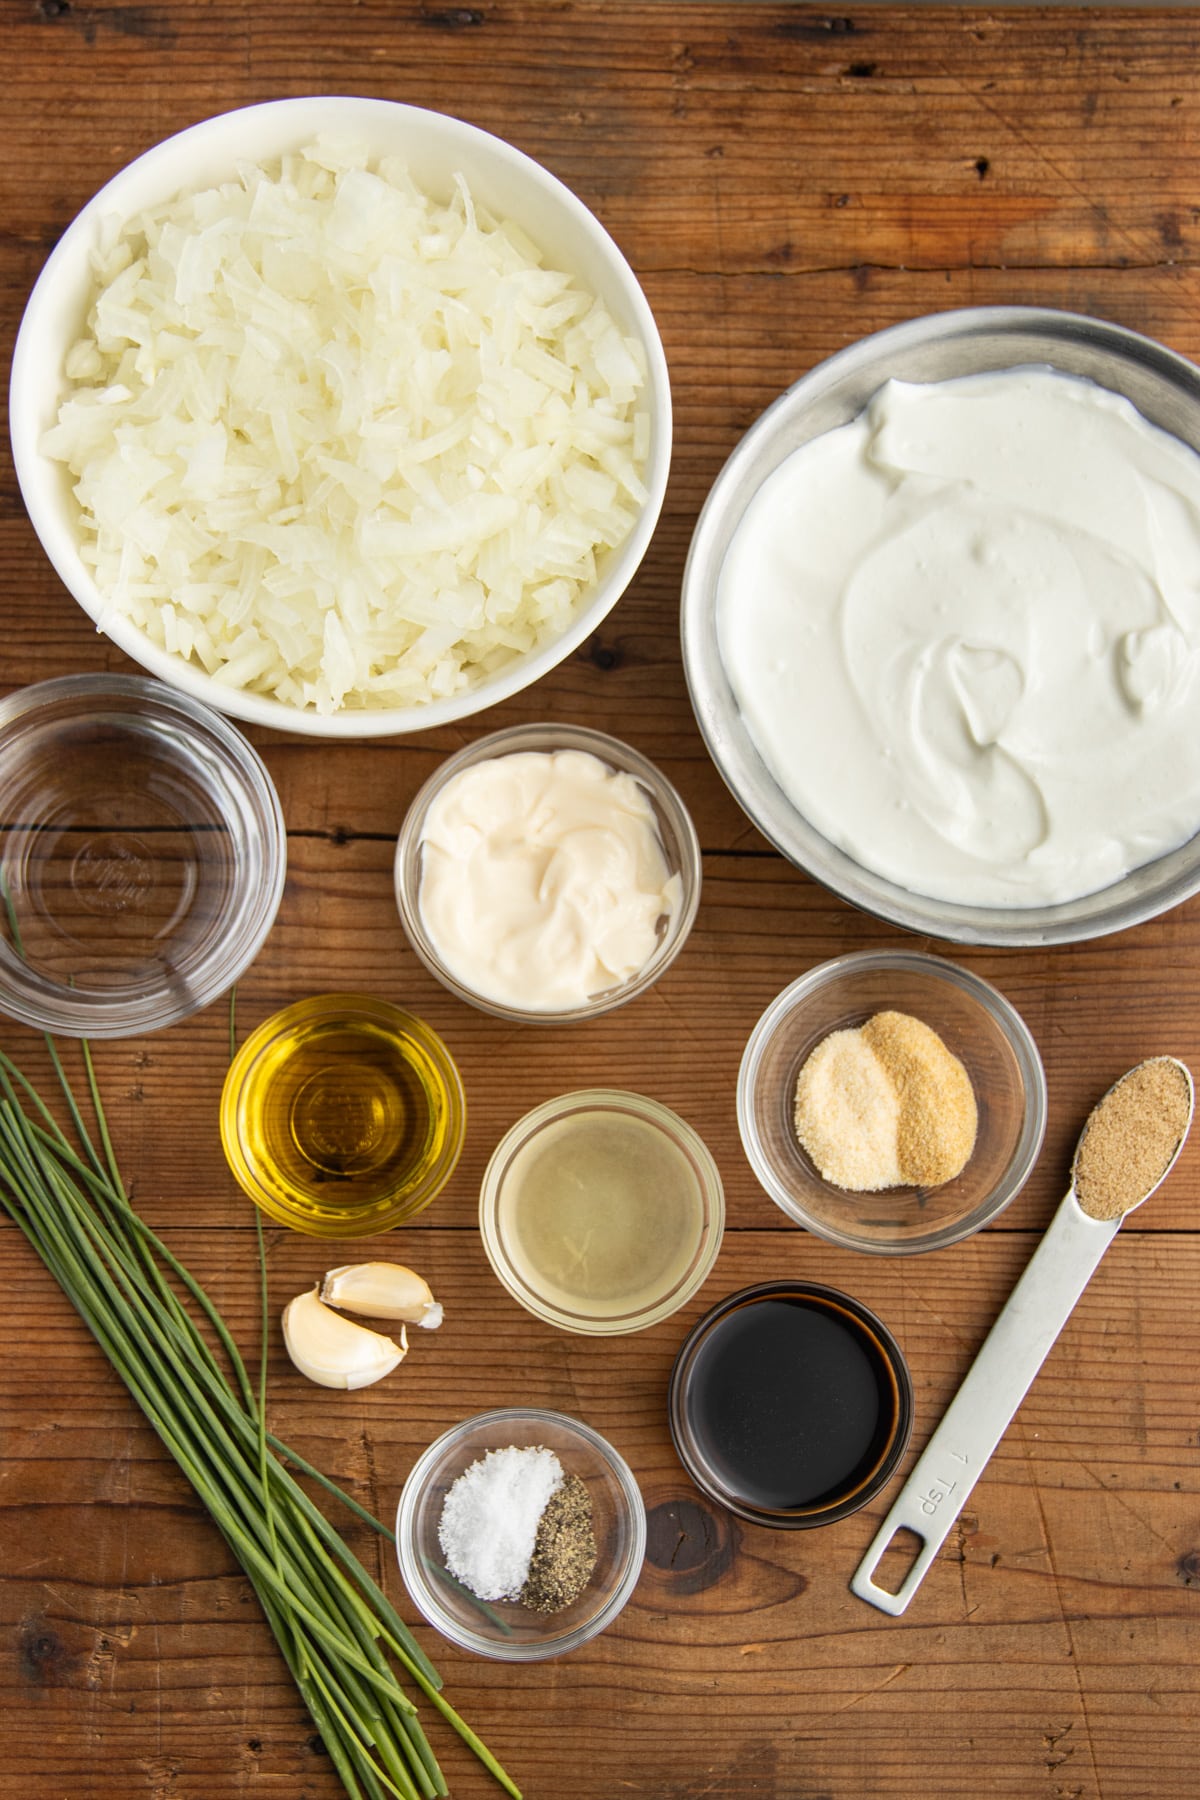 This is a picture of all the ingredients needed to make this onion dip with greek yogurt recipe.